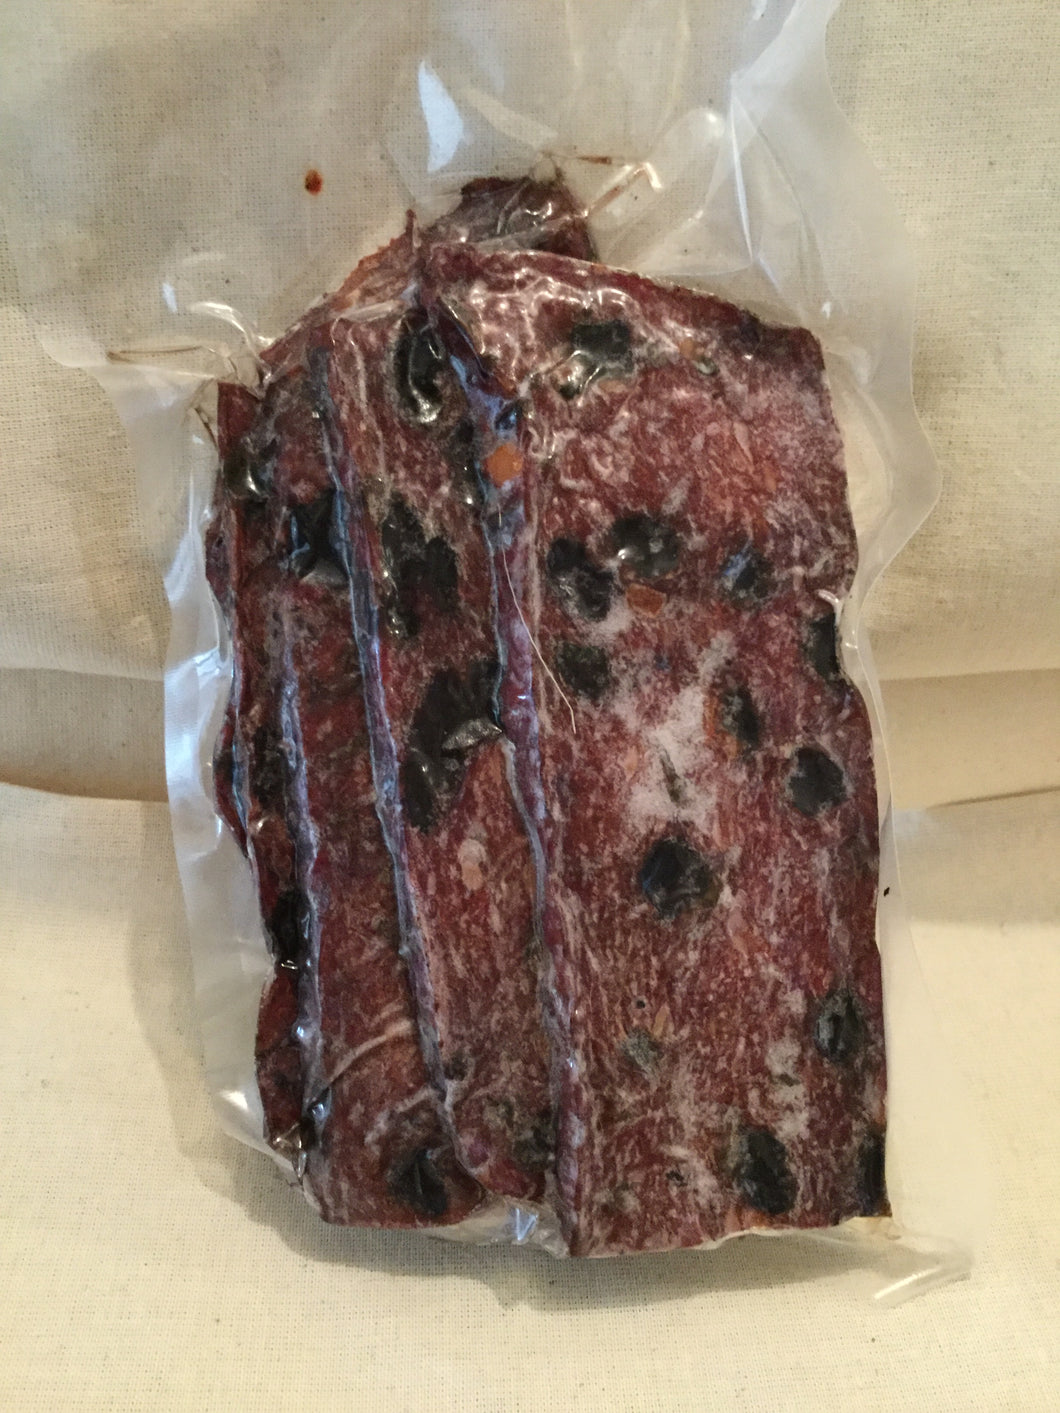 Maple Blueberry Bison Jerky